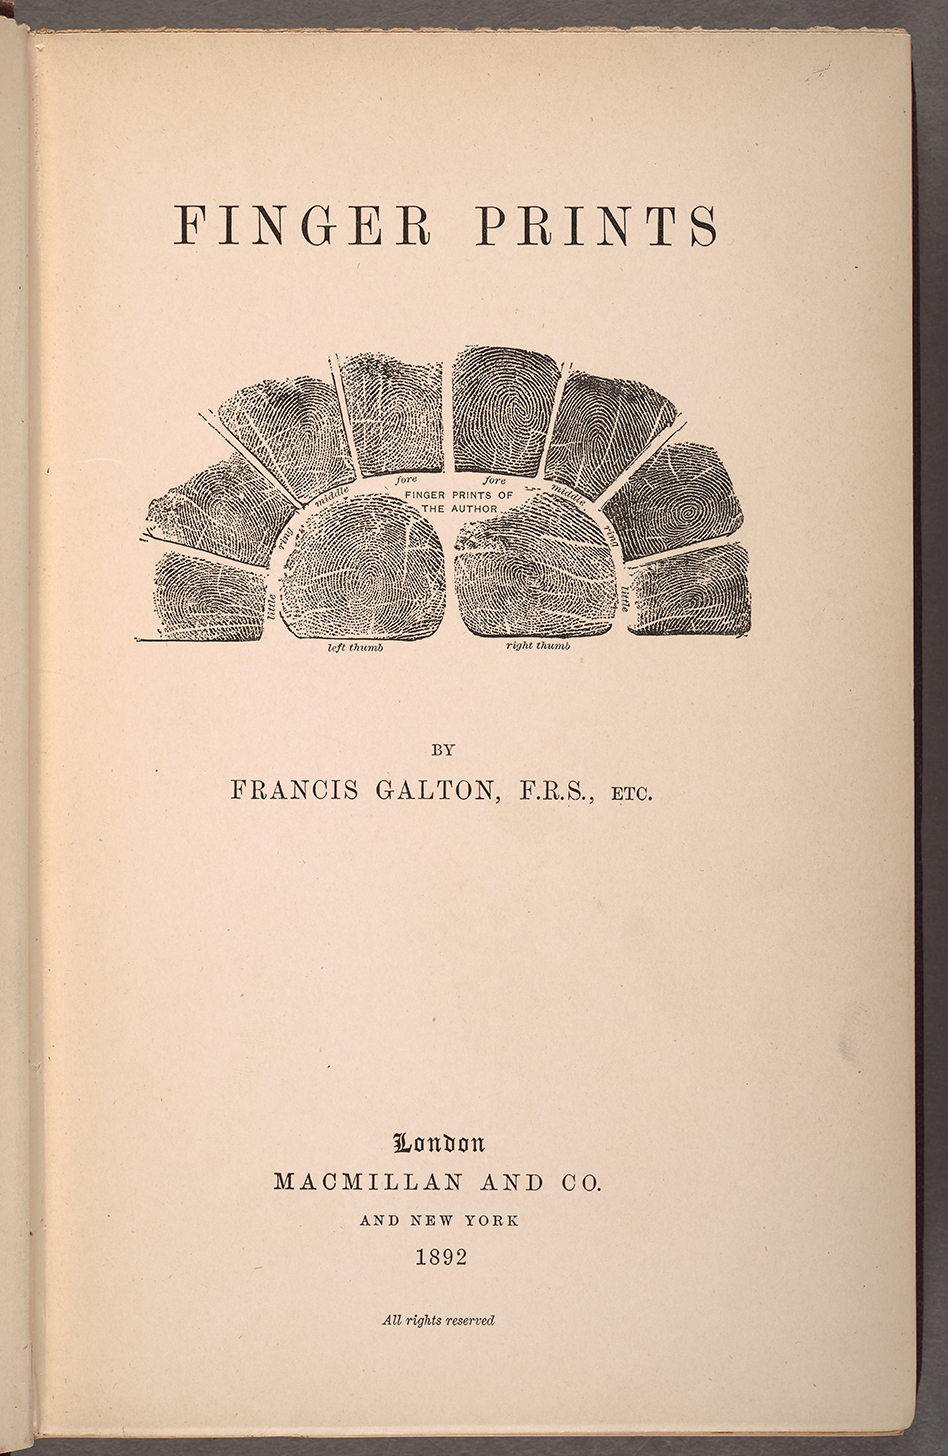 Title page of Finger Prints